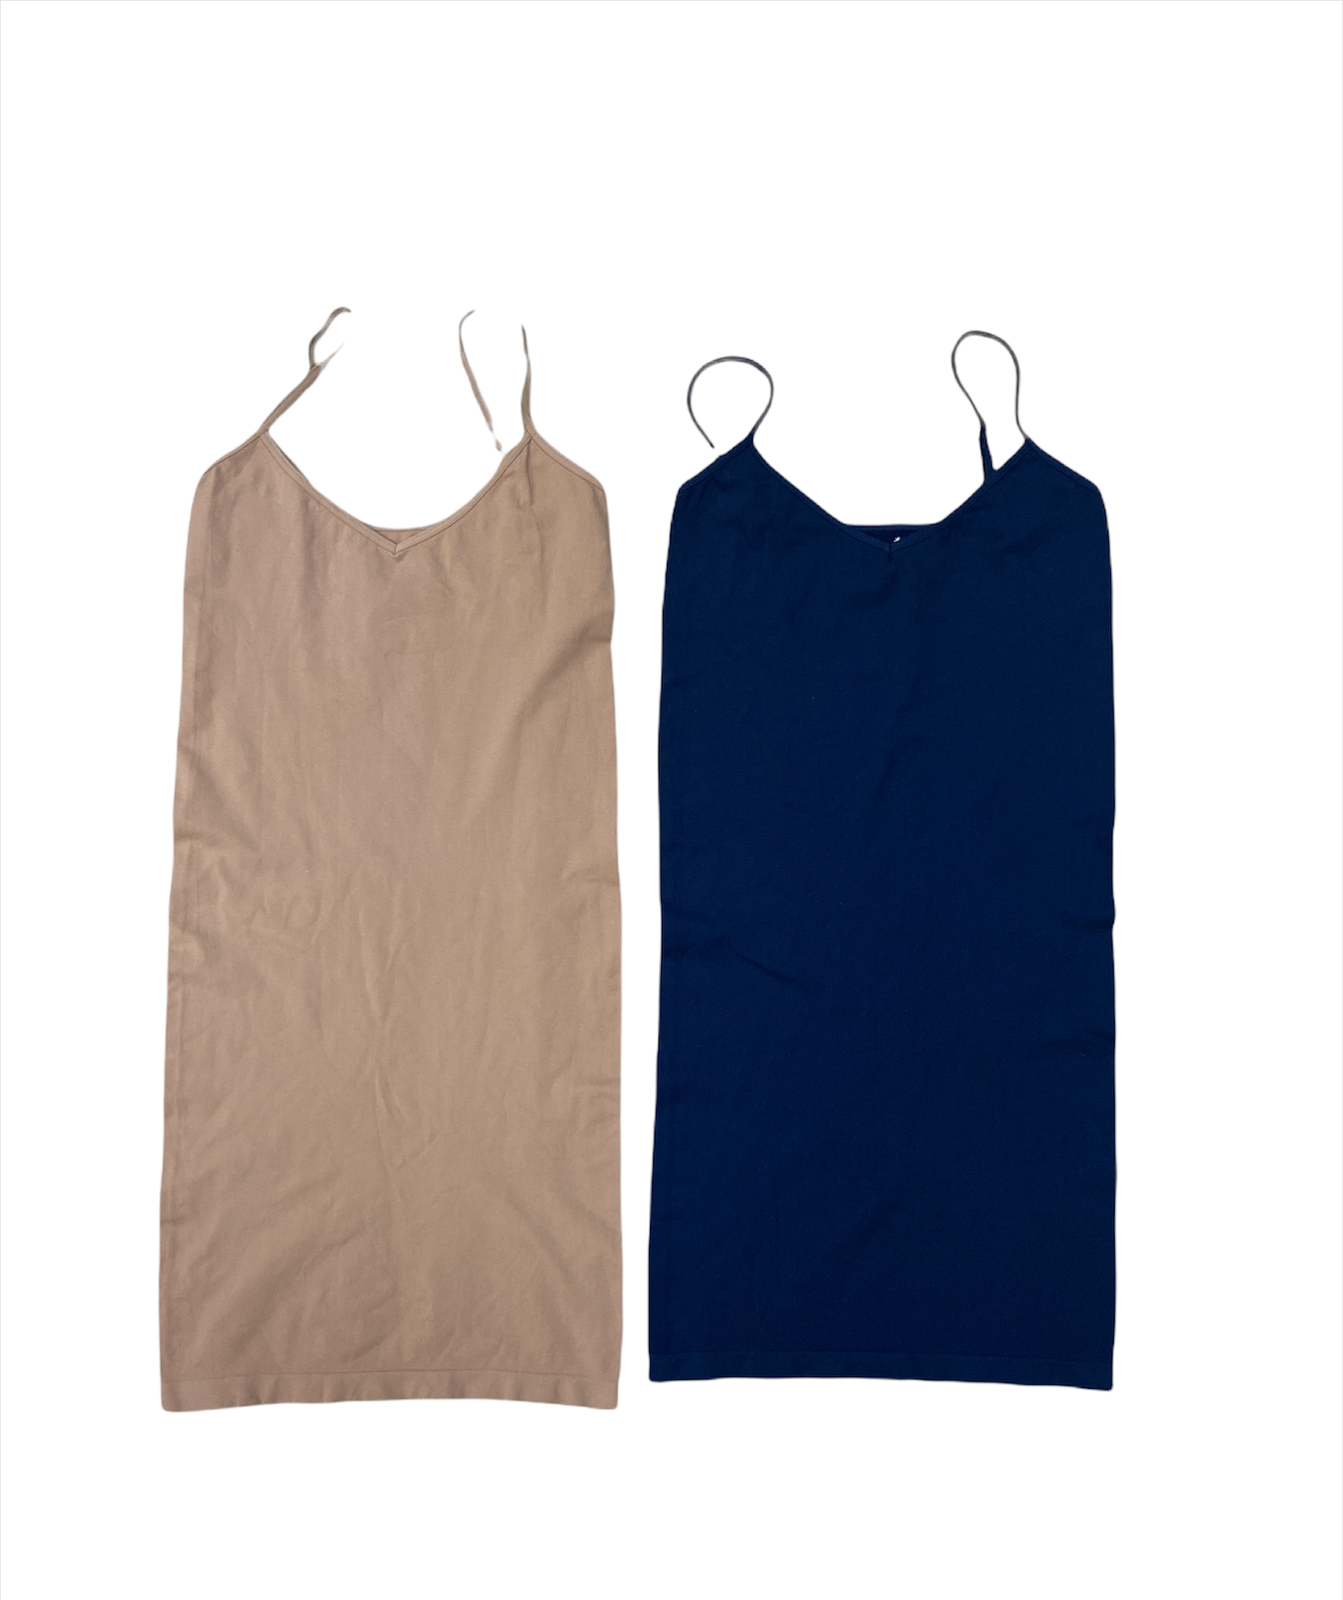 Primary image for FREE PEOPLE Intimately Womens Set of 2 Camisole Cosy Fit Beige/Blue Size XS/S